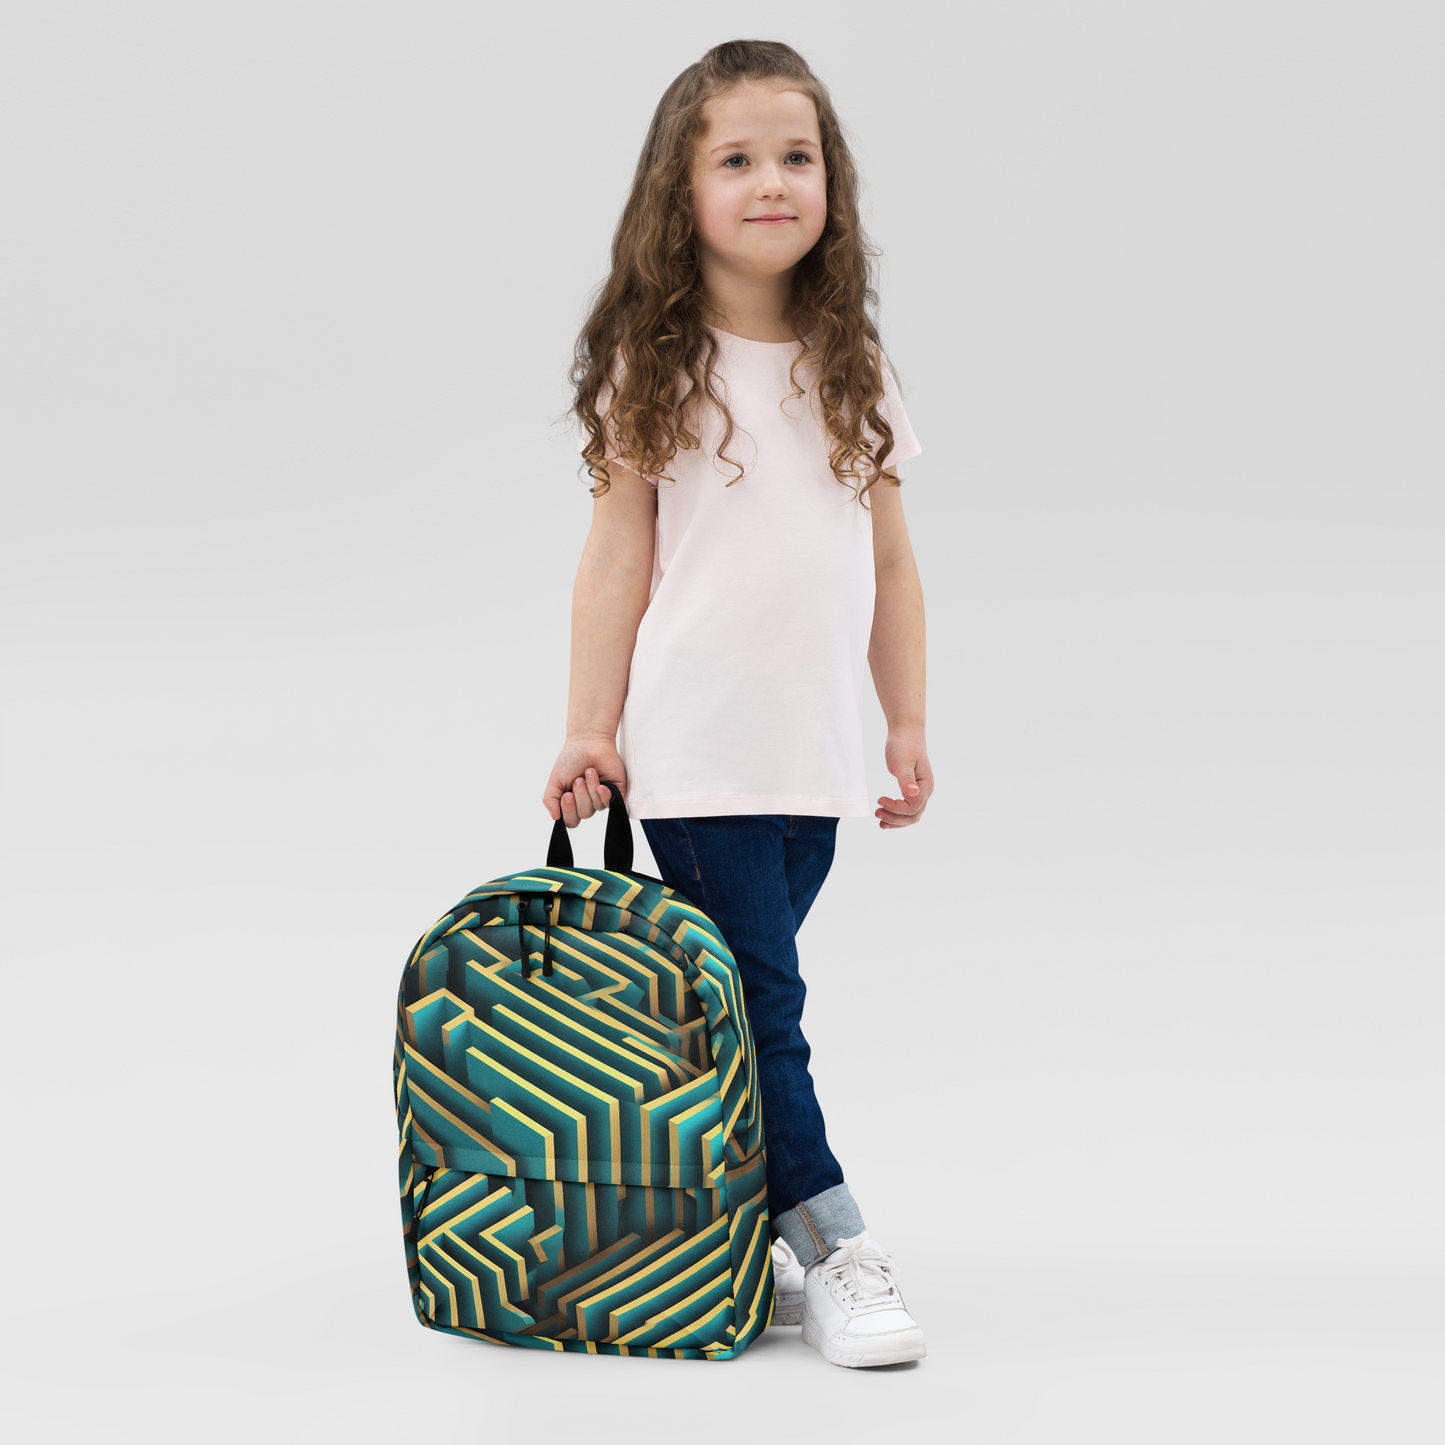 3D Maze Illusion | 3D Patterns | All-Over Print Backpack - #5